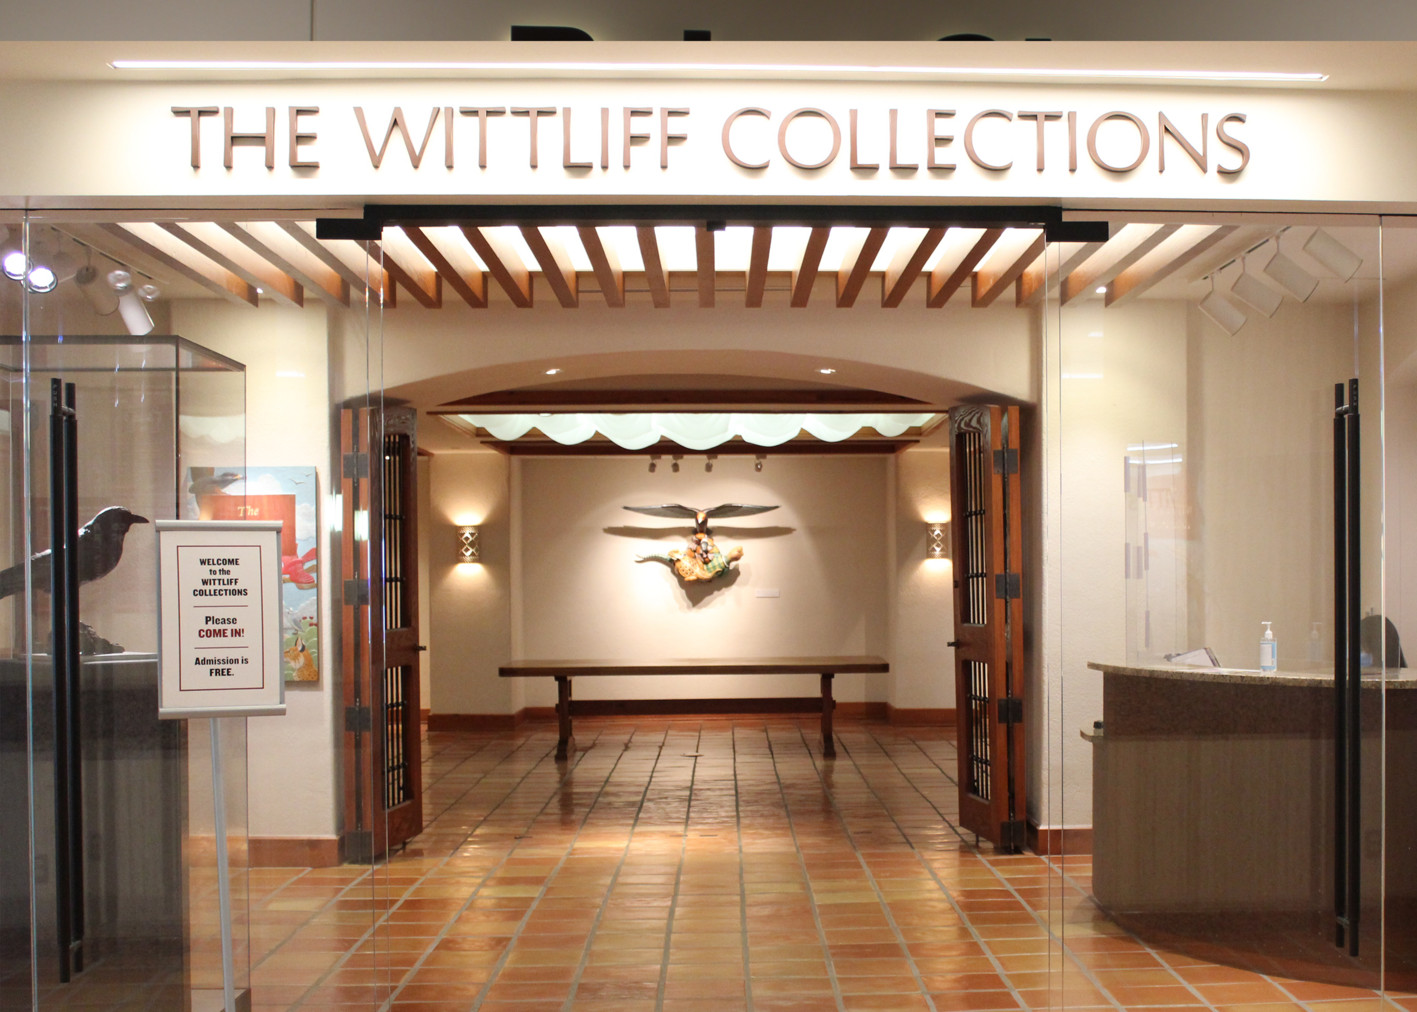 The Wittliff Collections at Texas State